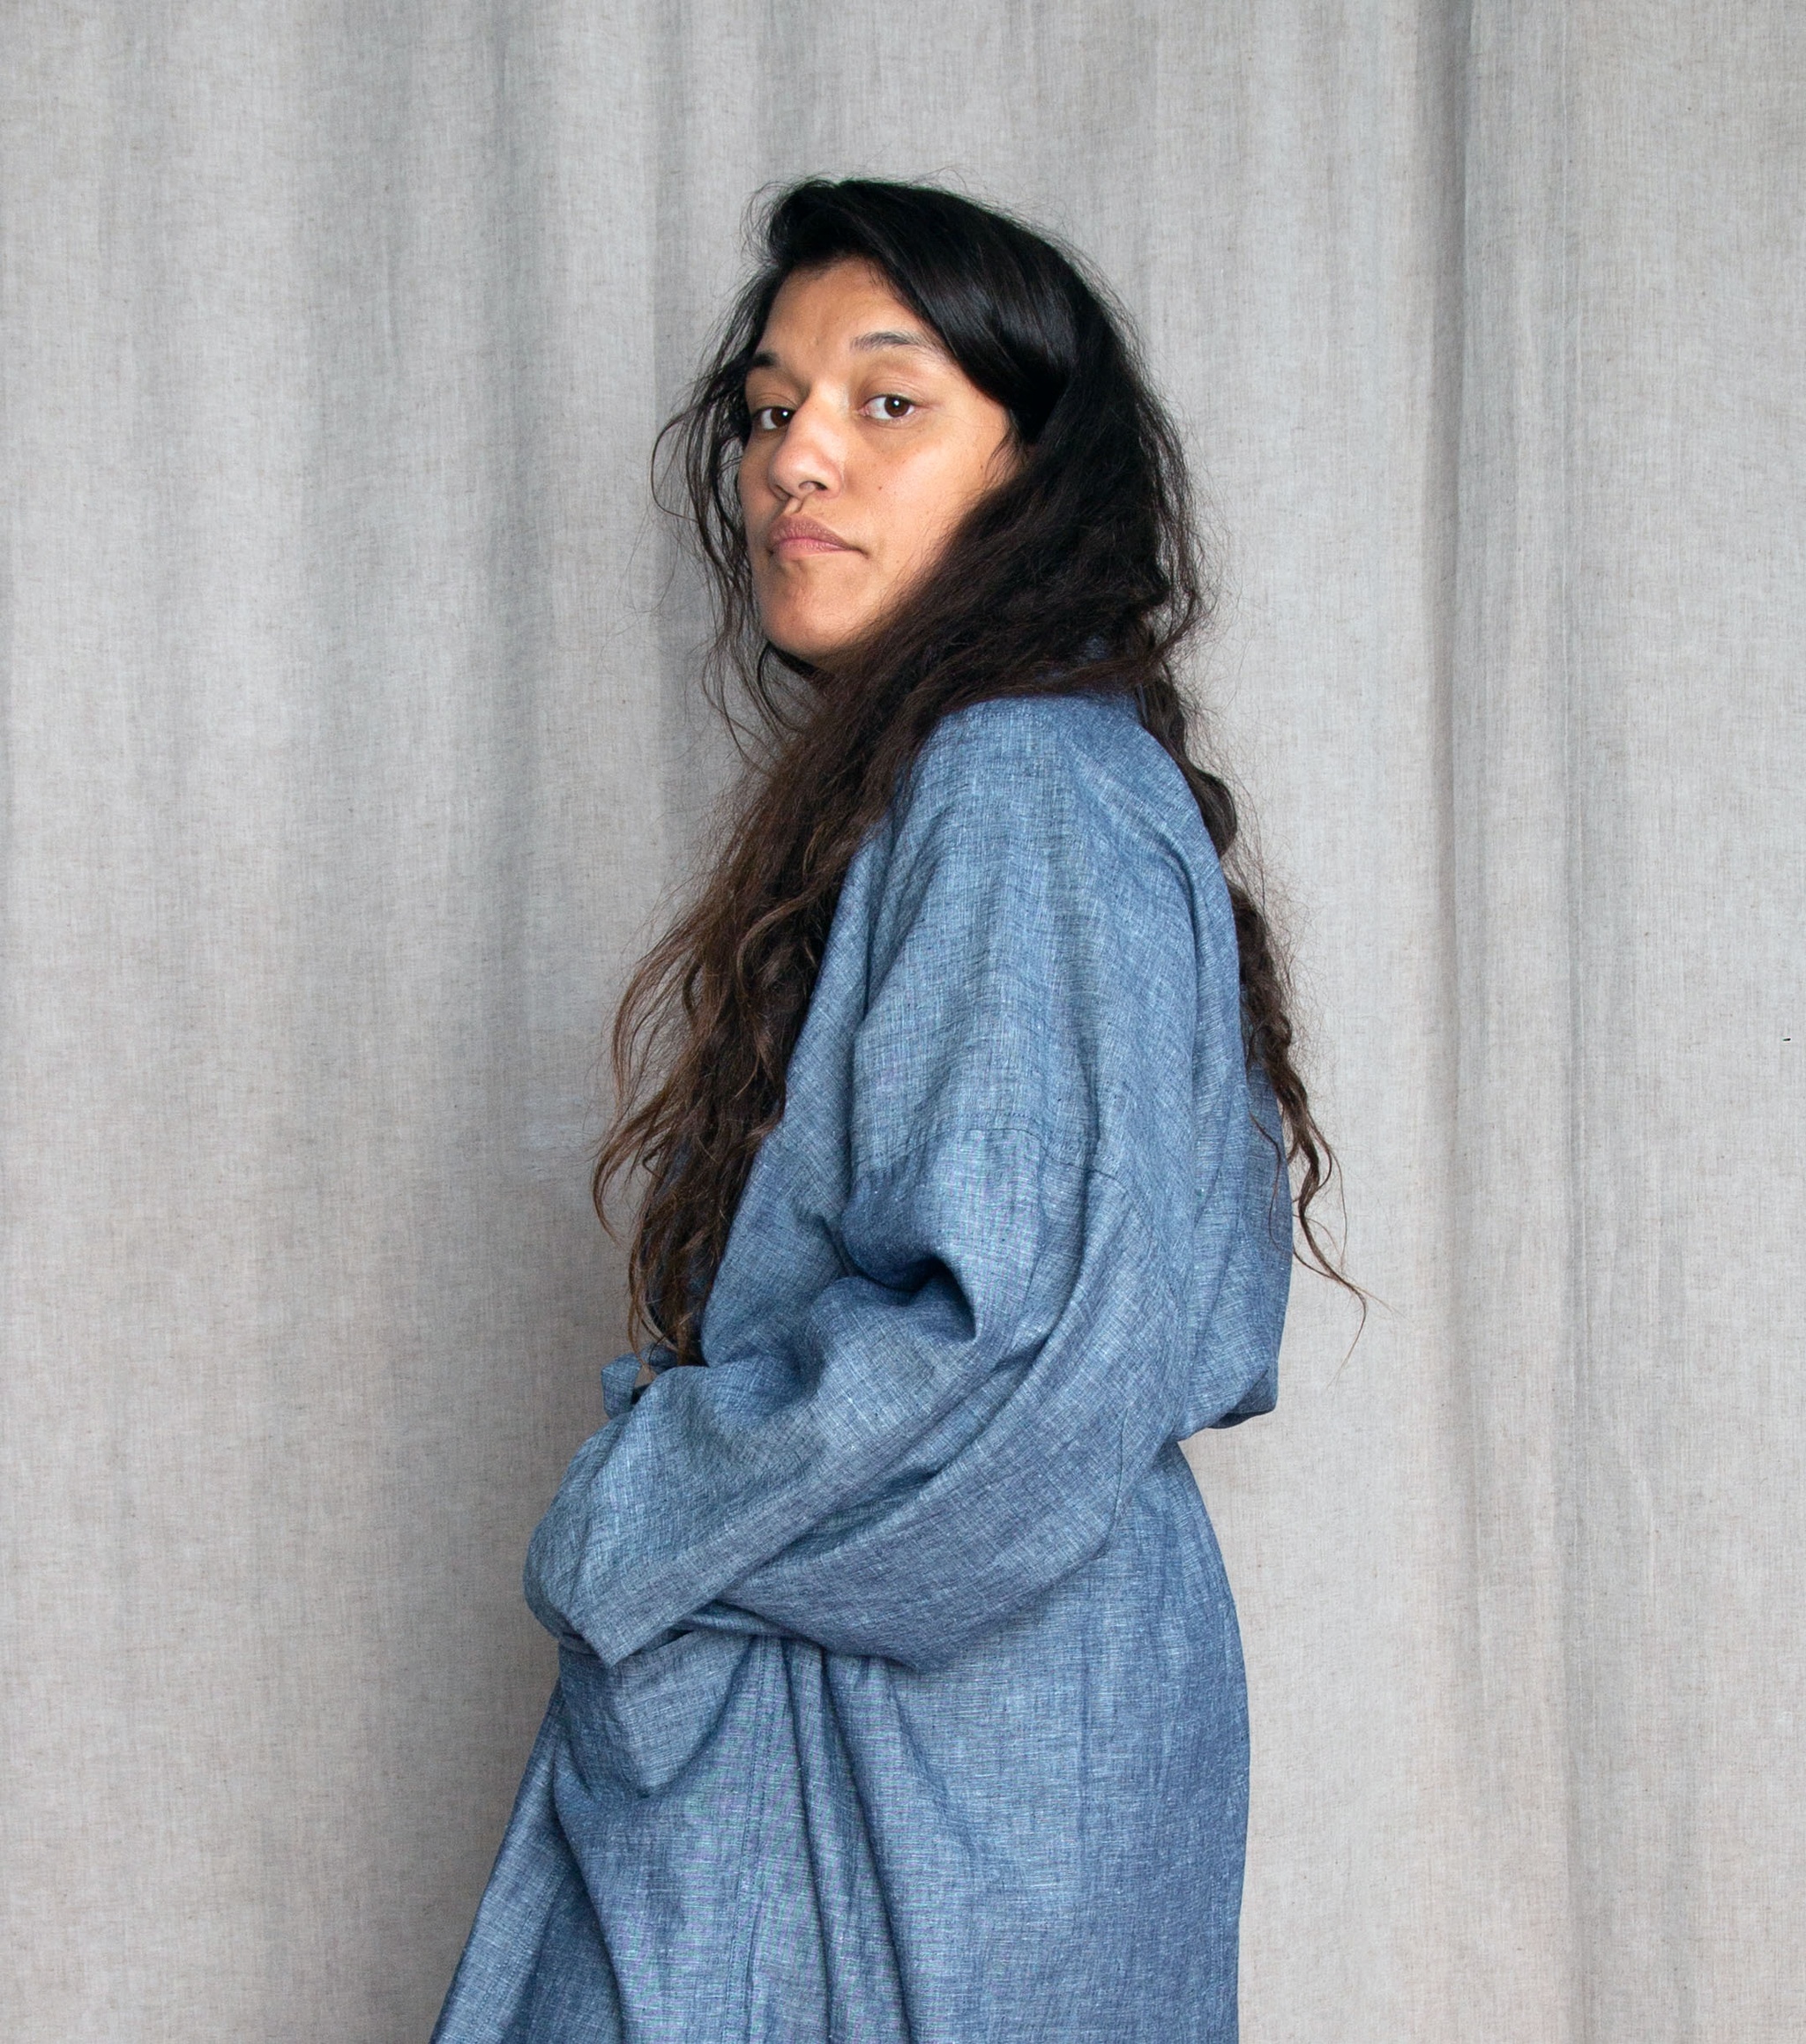 The artist Pelenakeke Brown stands with her shoulder and face turned to the camera. She has long brown hair that falls over her shoulder and back and holds one hand to her waist. She wears a draped, denim-colored garment that resembles a dress or robe. 